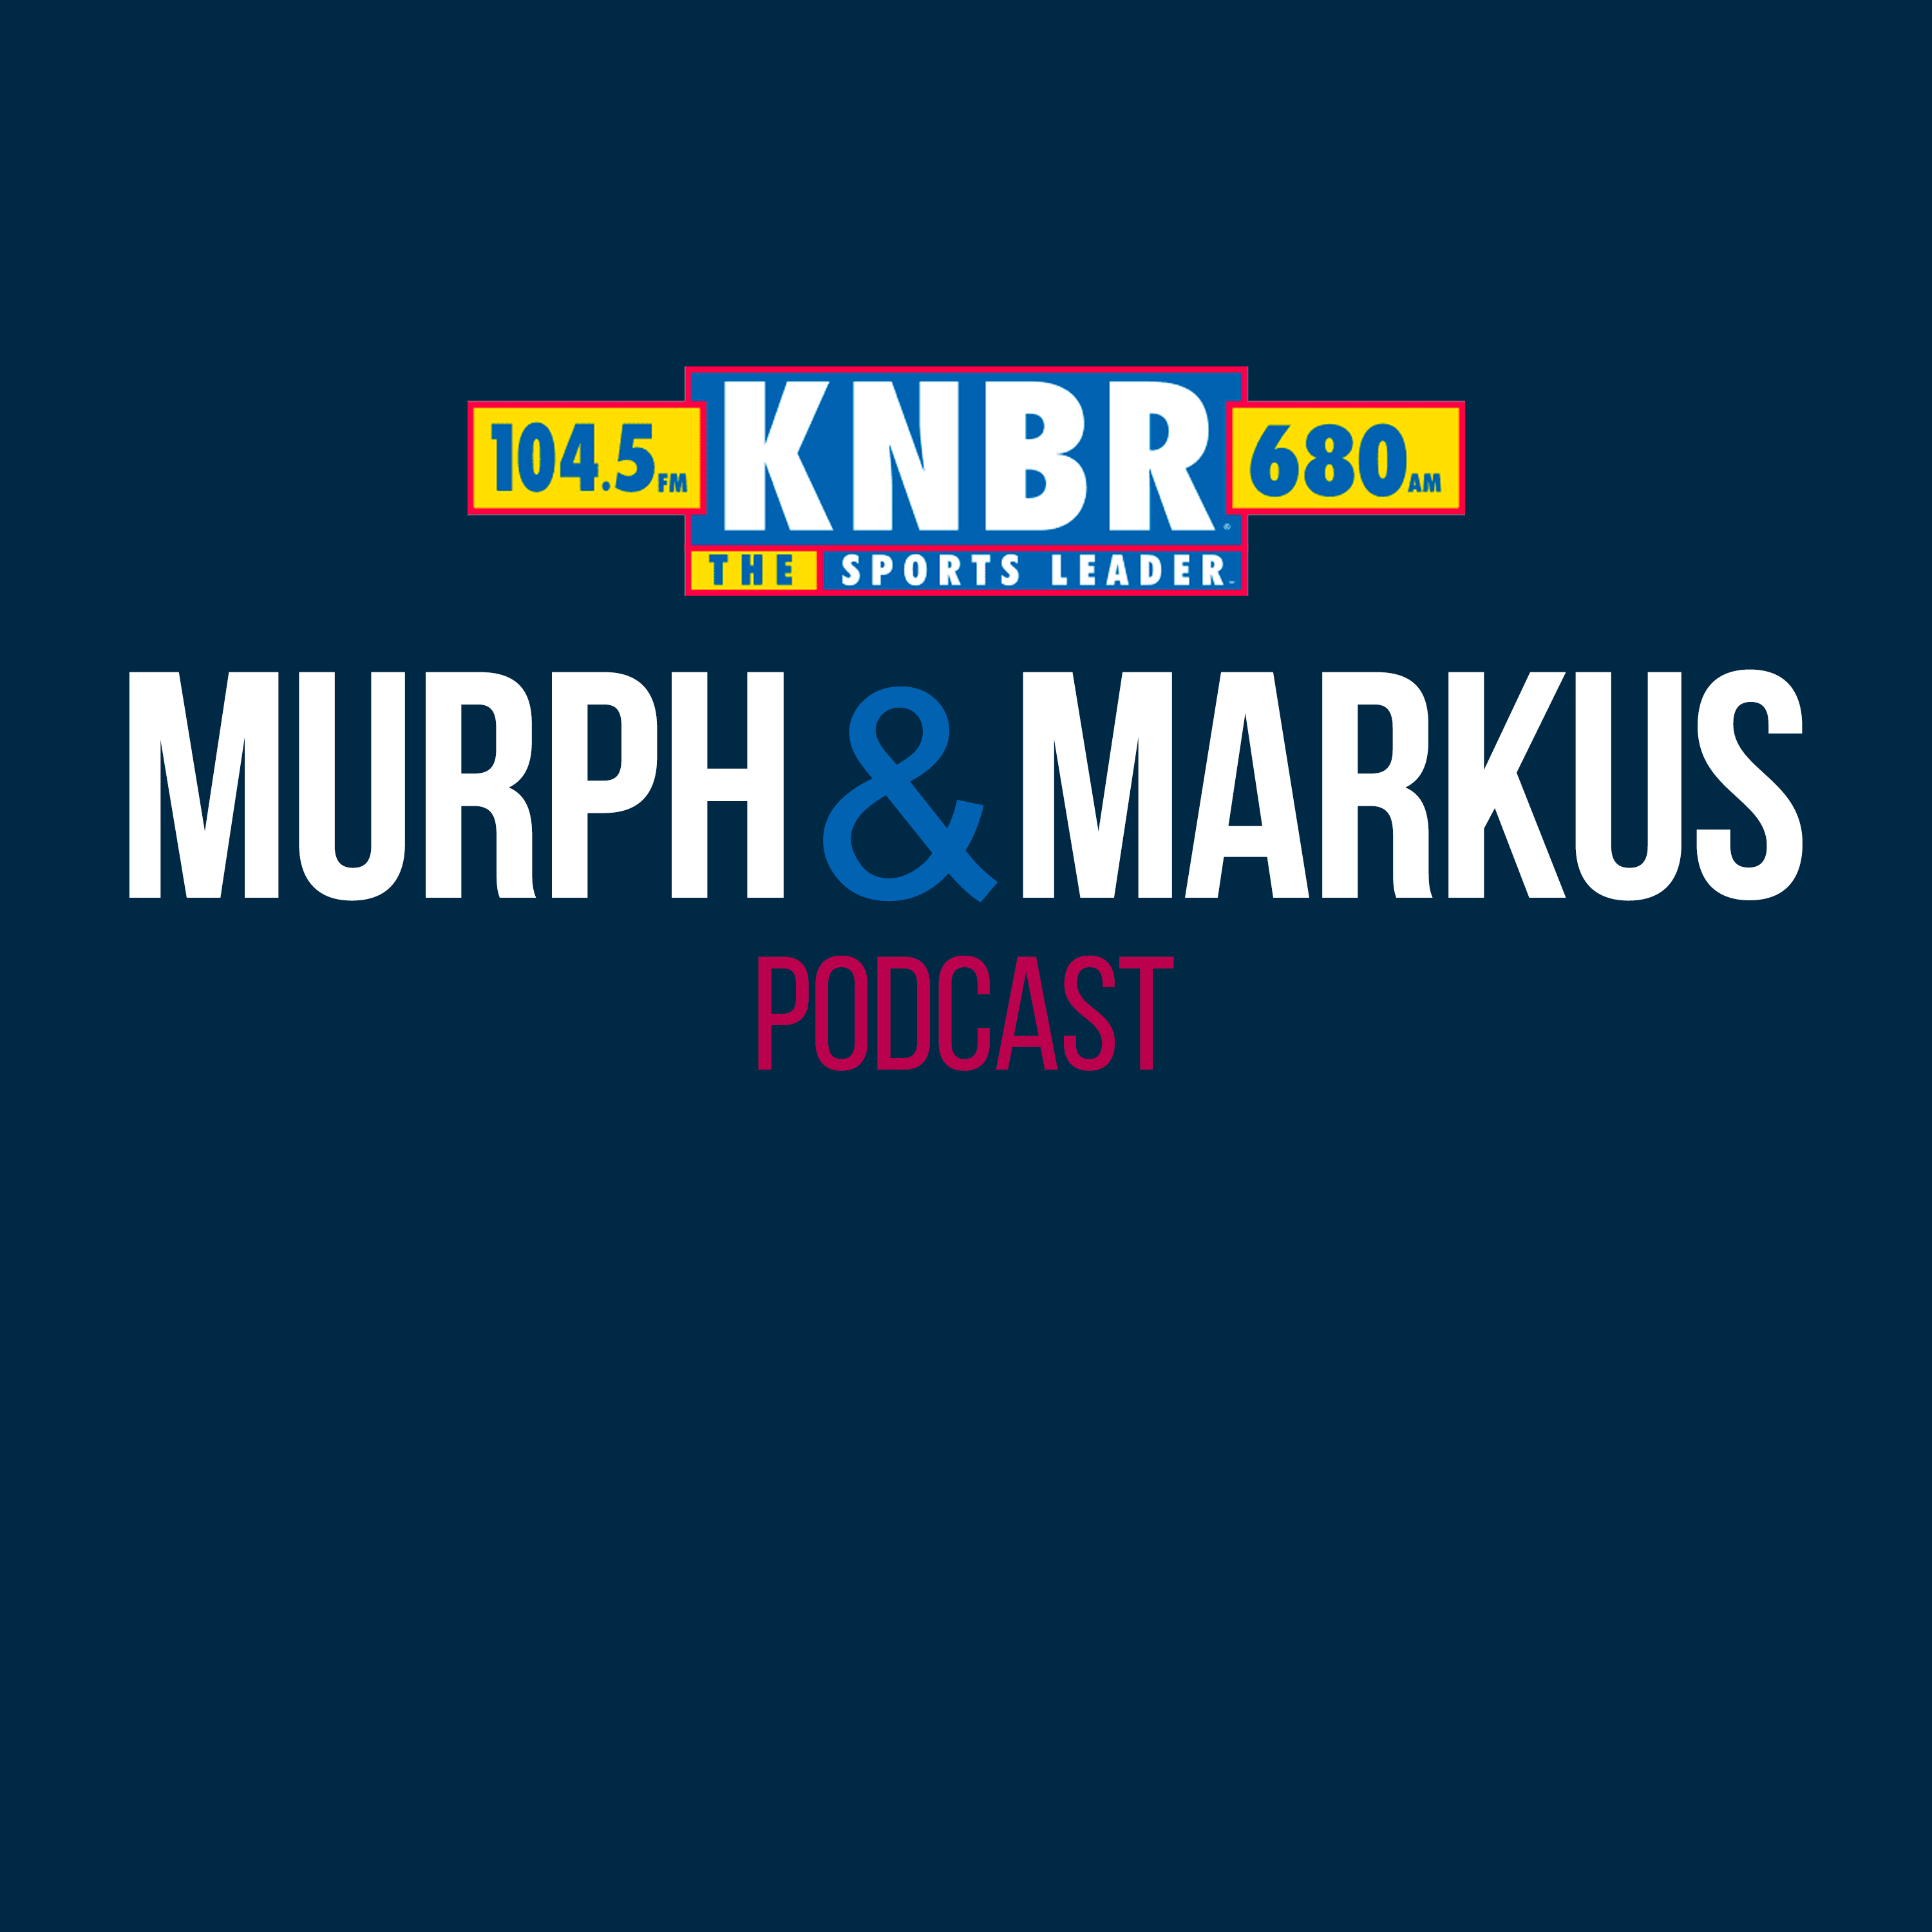 6-14 Hour 1: Murph & Markus react to Farhan Zaidi's comments from his interview with Tolbert & Copes yesterday, discuss what Trevor Lawrence's contract extension means for Brock Purdy, & talk to Mark Cannizzaro